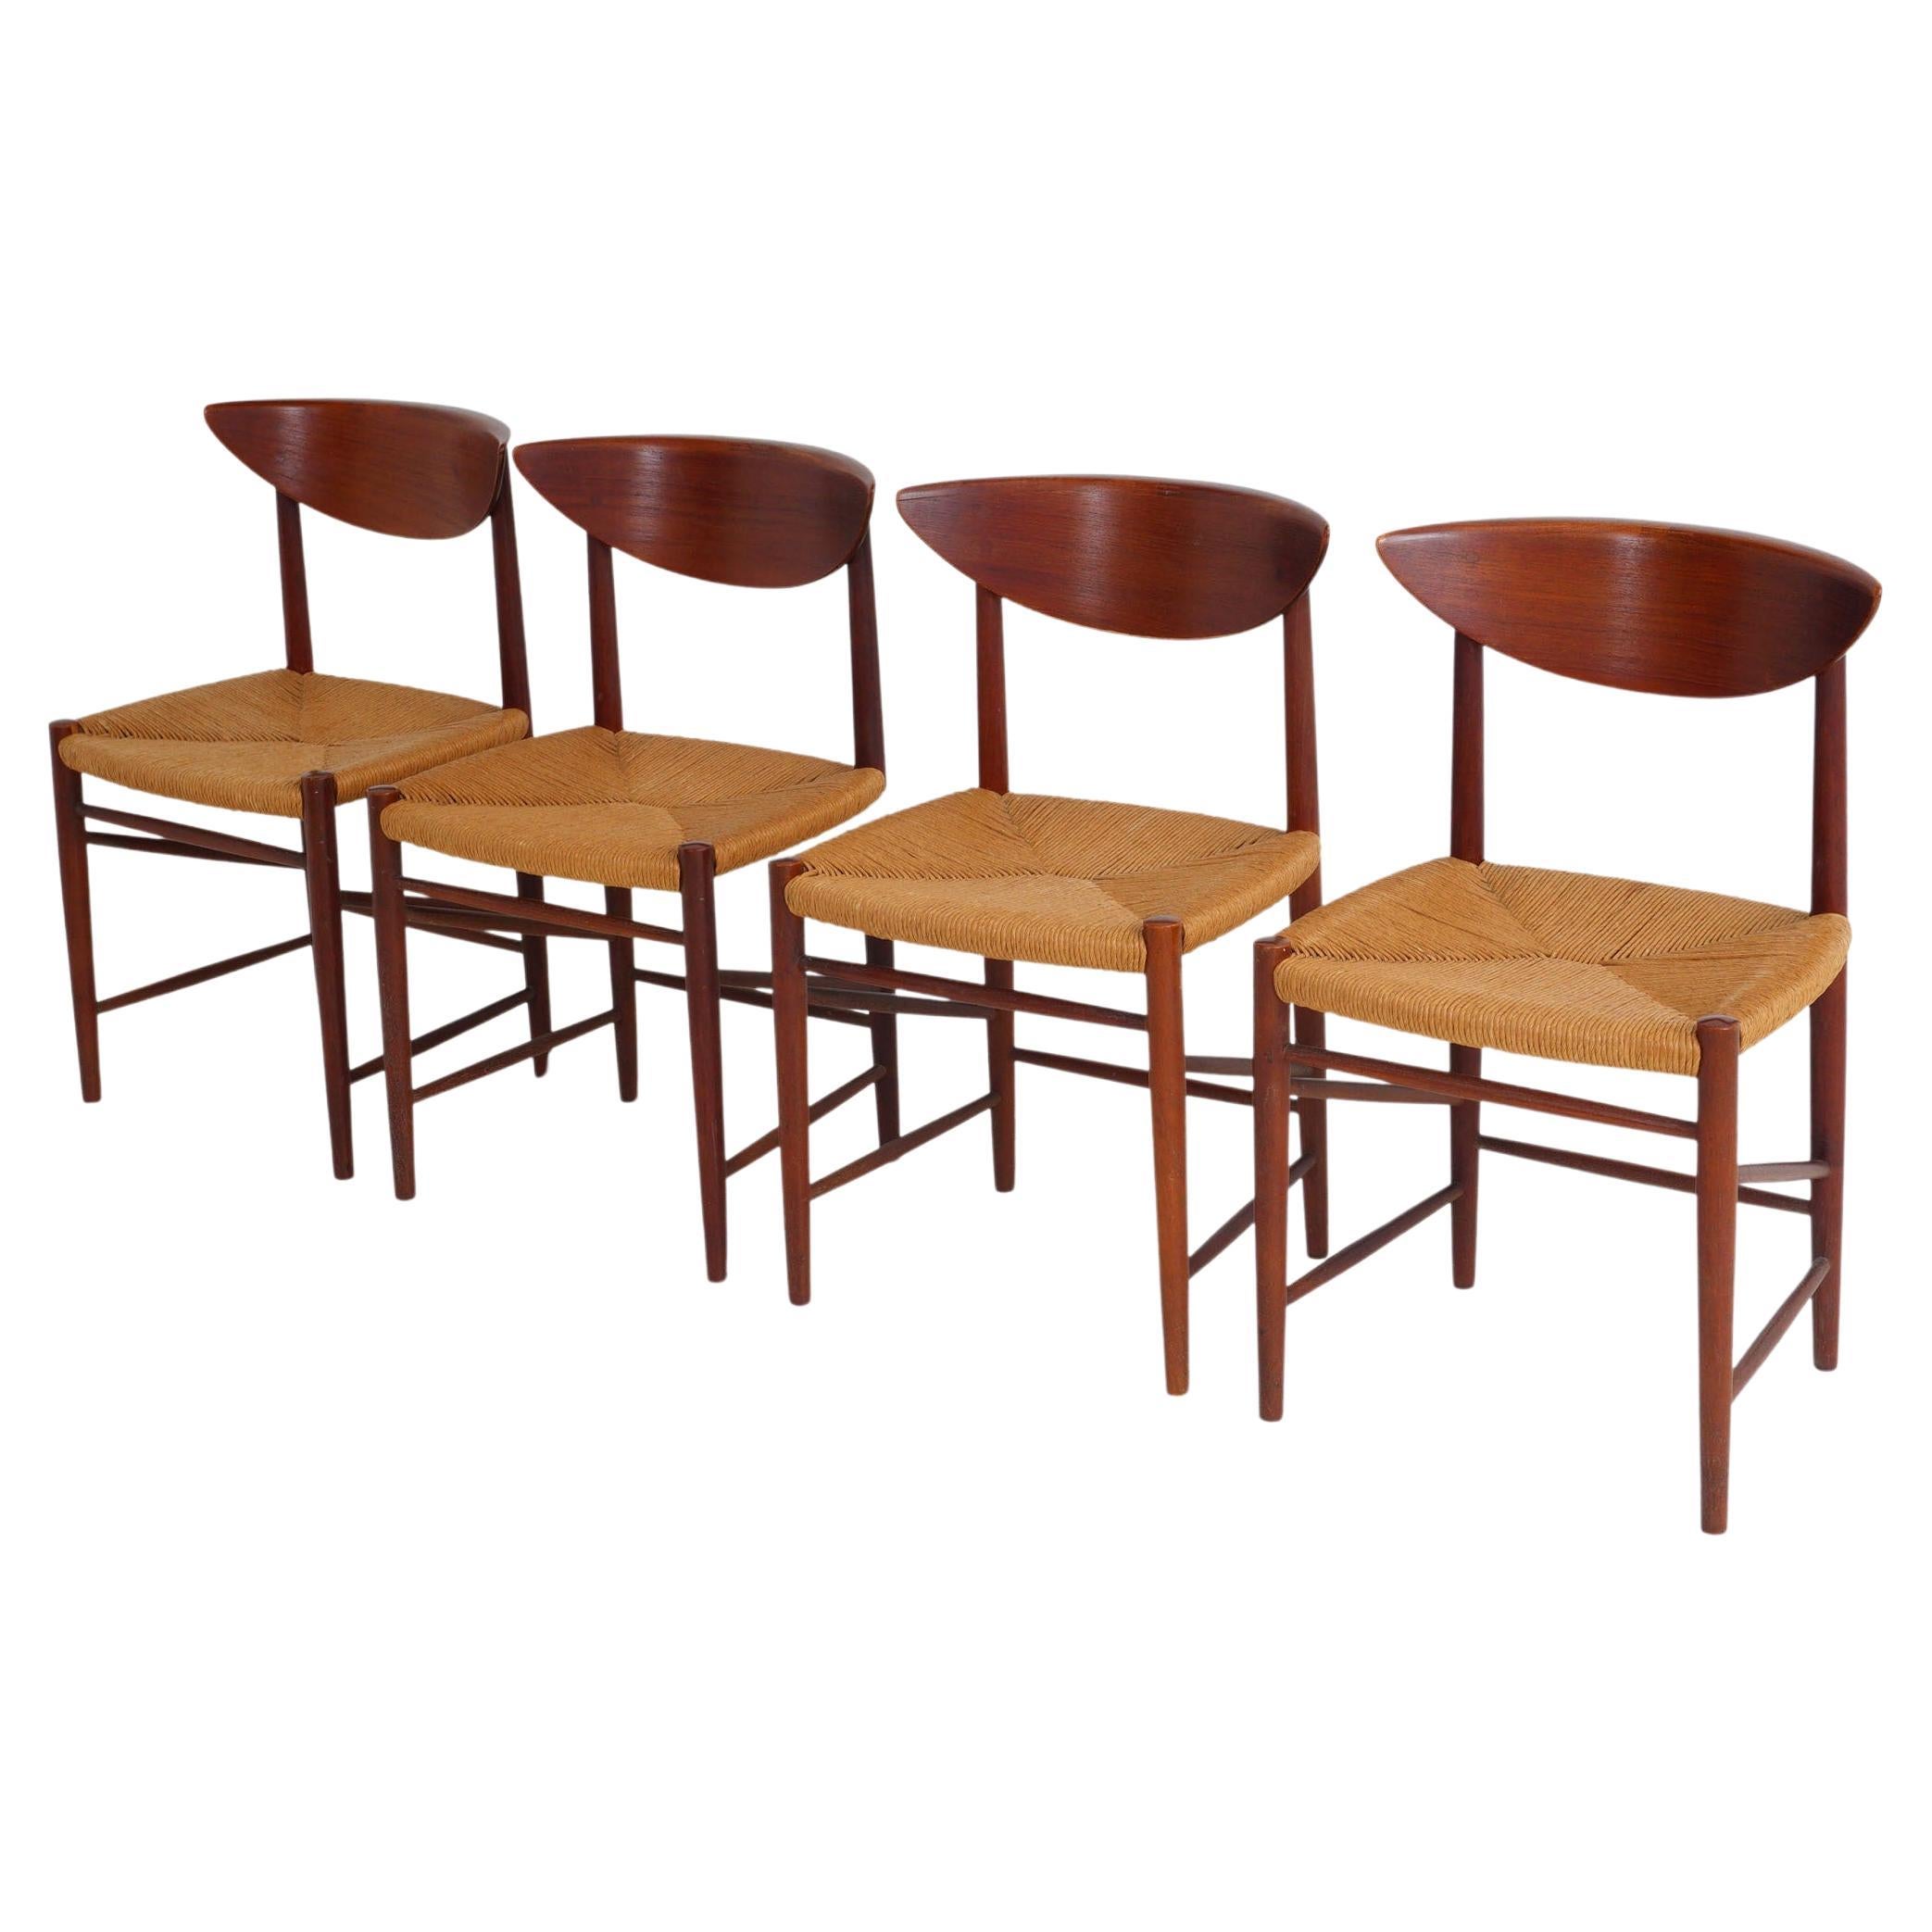 Midcentury Dining Chairs by Peter Hvidt & Orla Mølgaard-Nielsen, 1950s For Sale